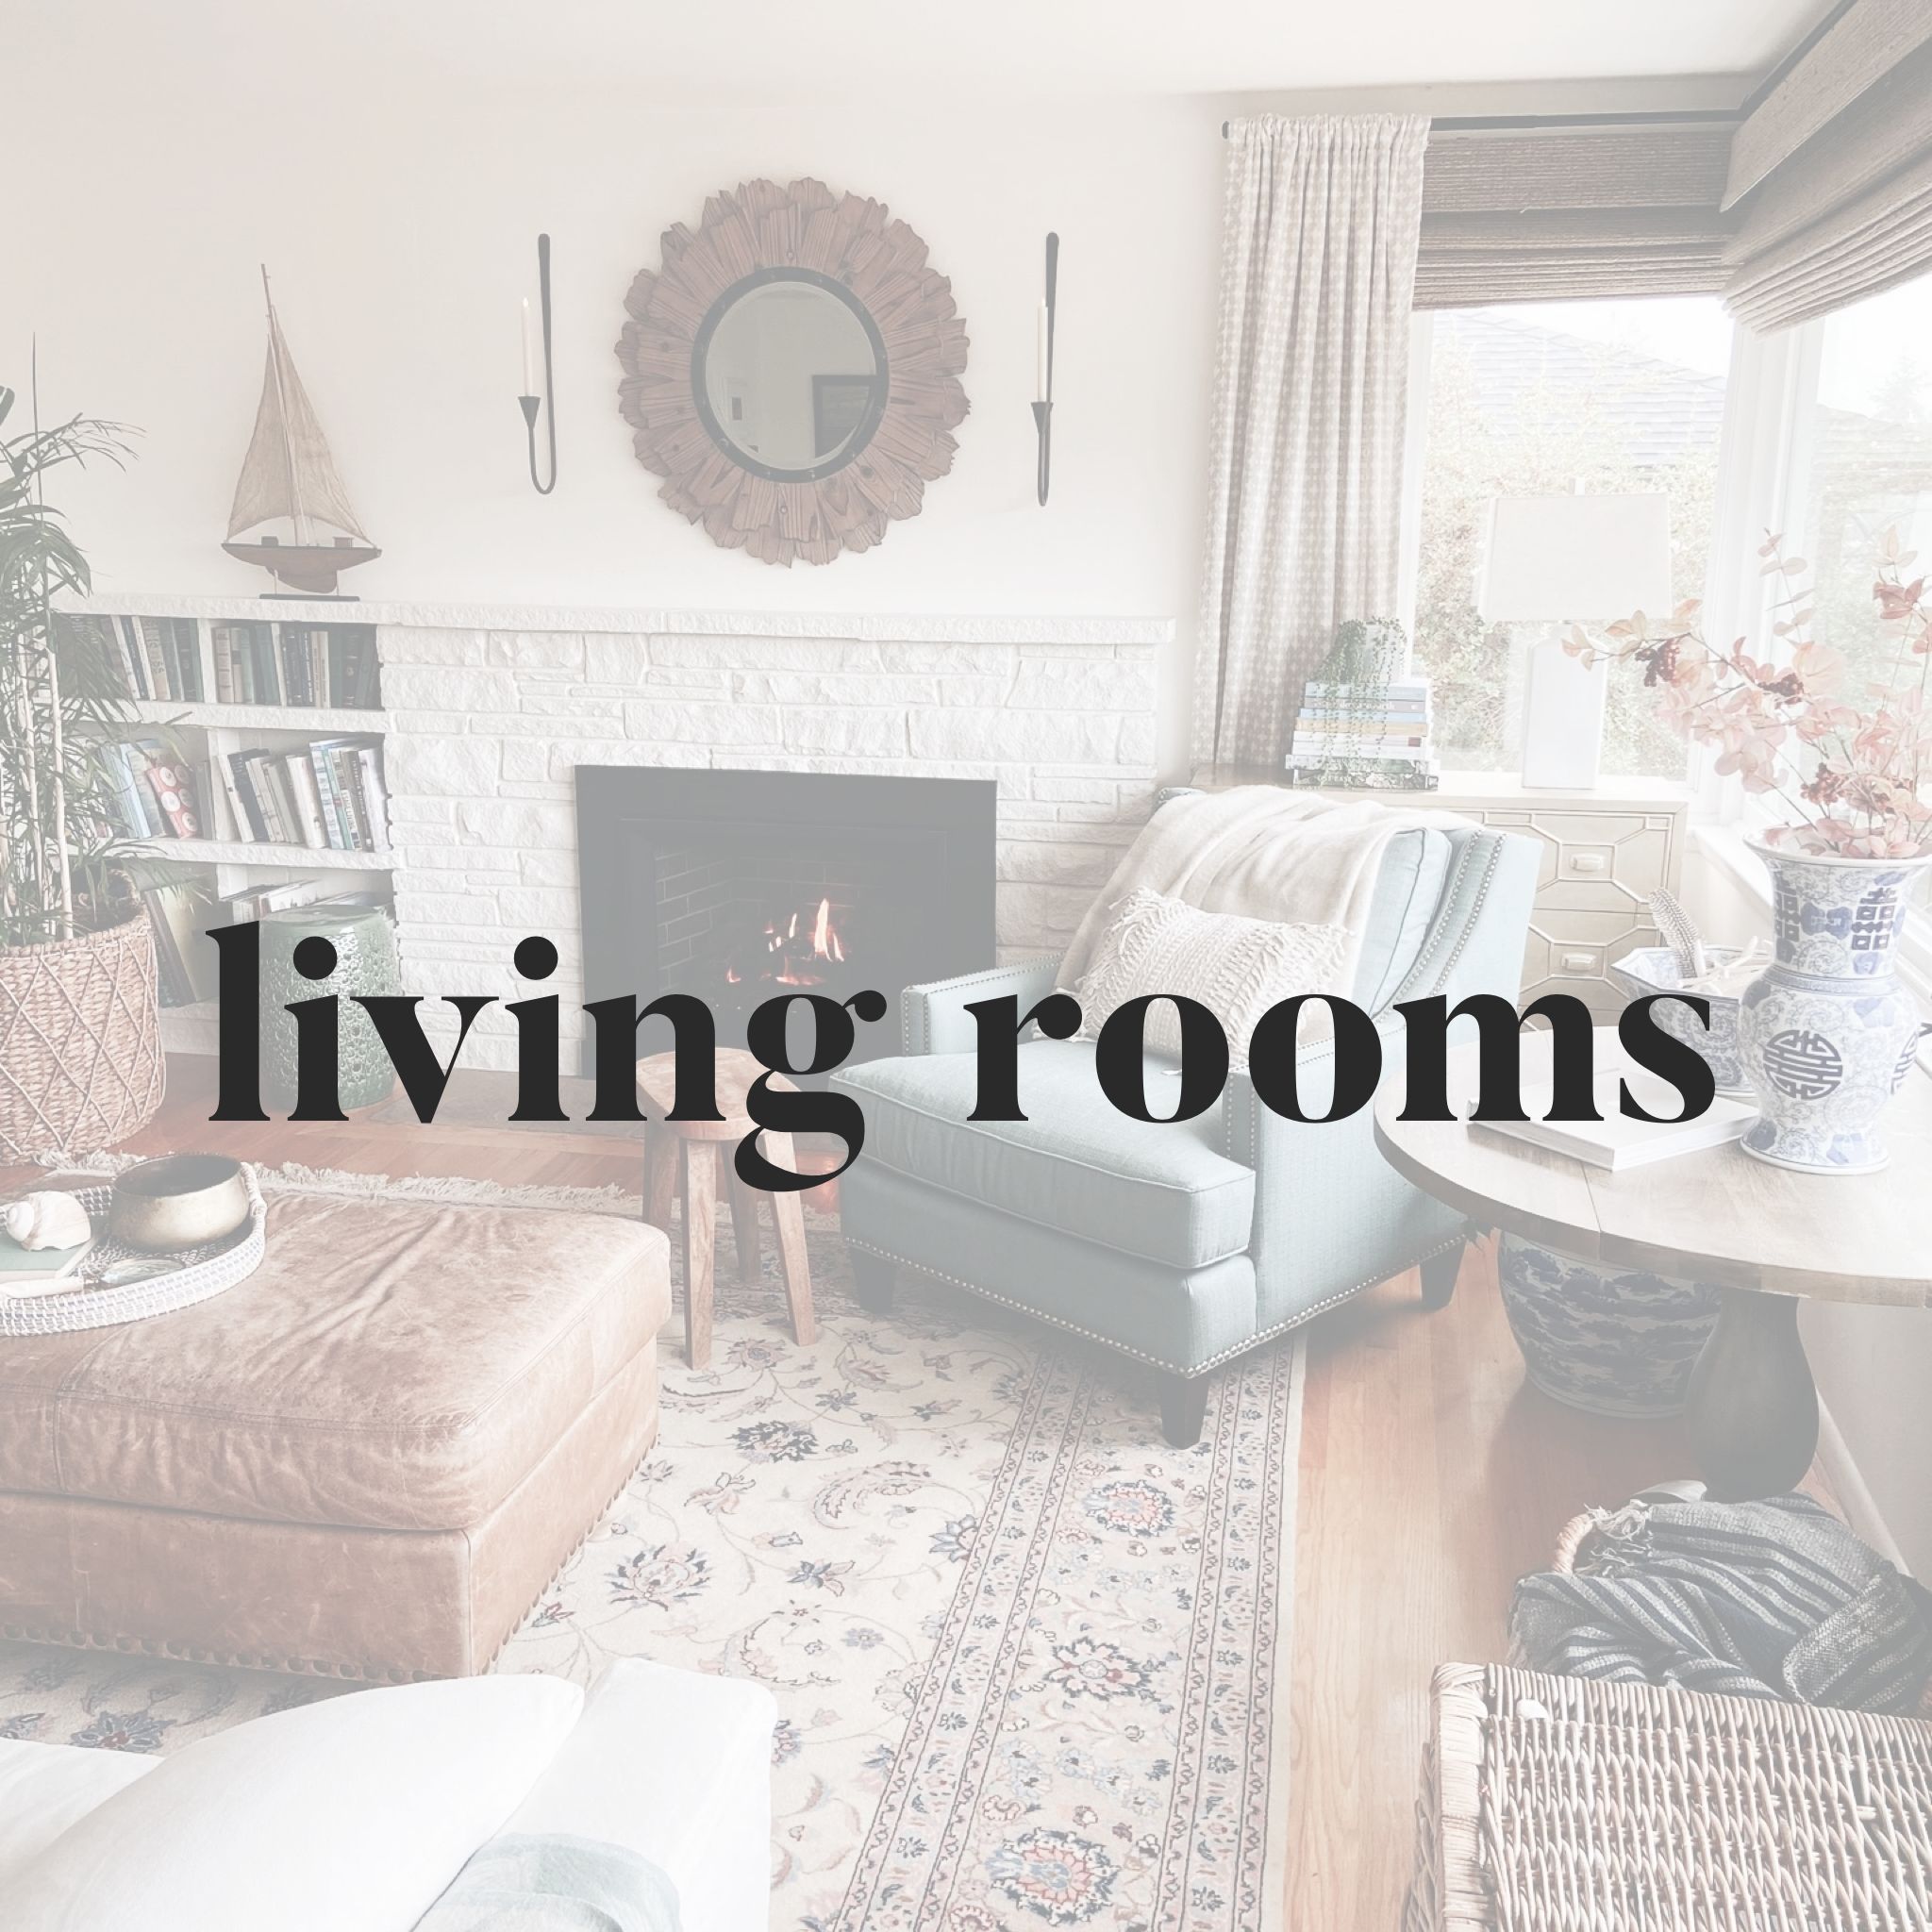 How to Decorate a Room {Inspiration Gallery}